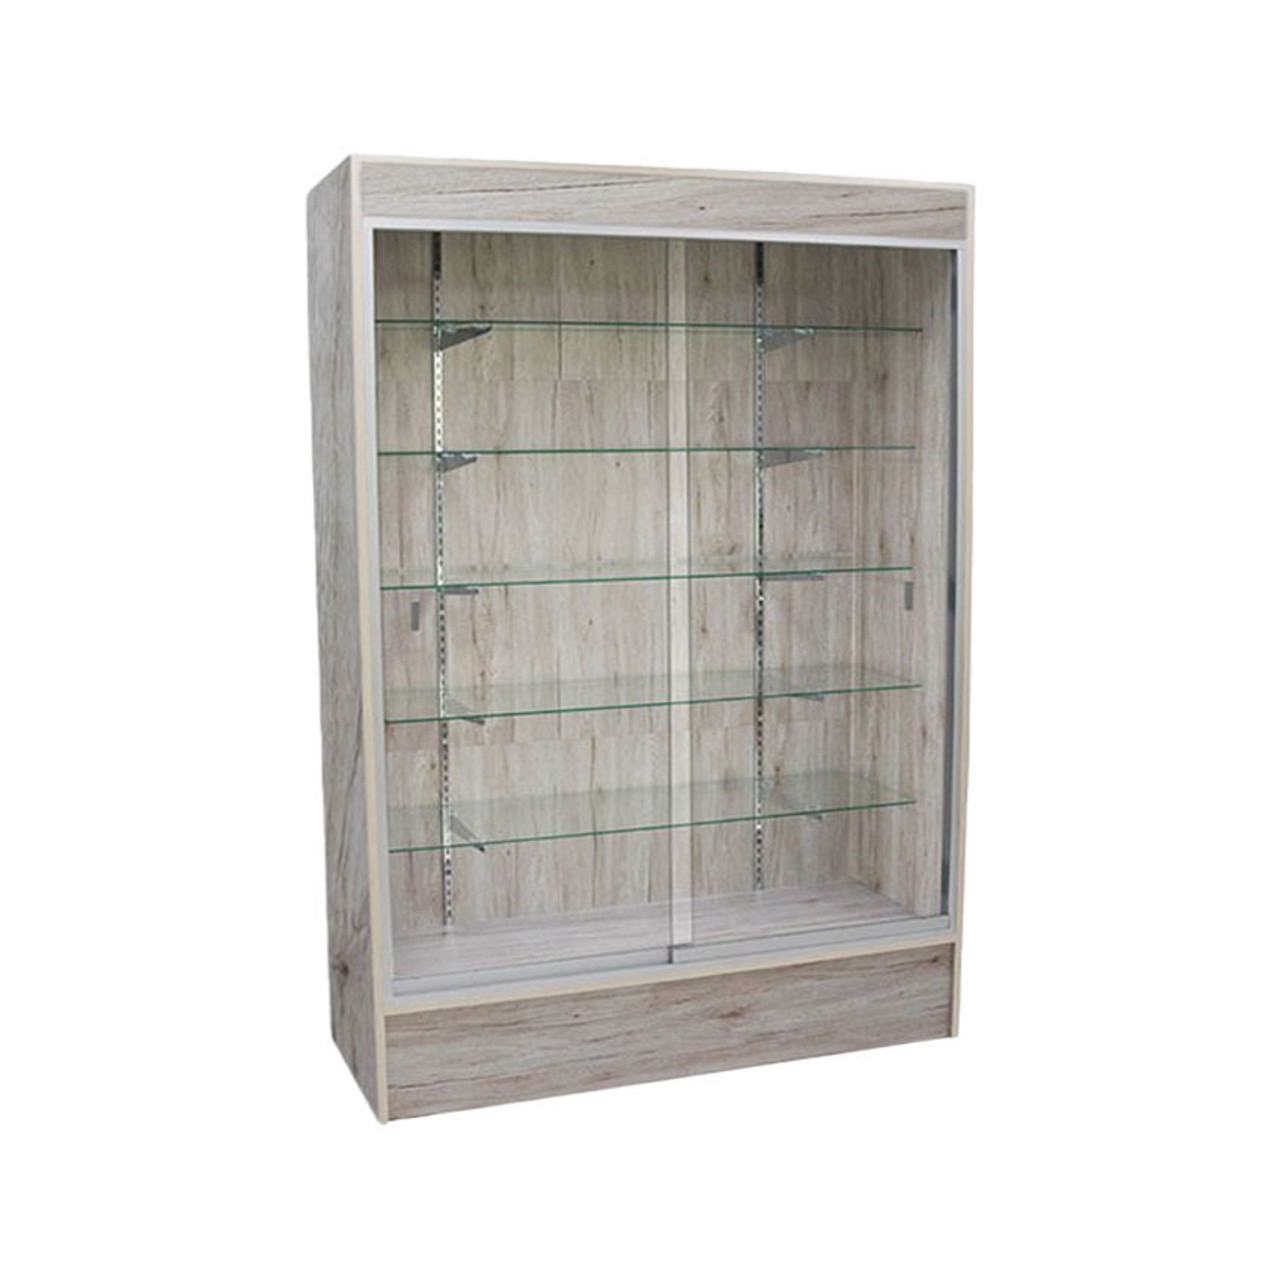 Economy Wall Glass Display Showcase with Light 78